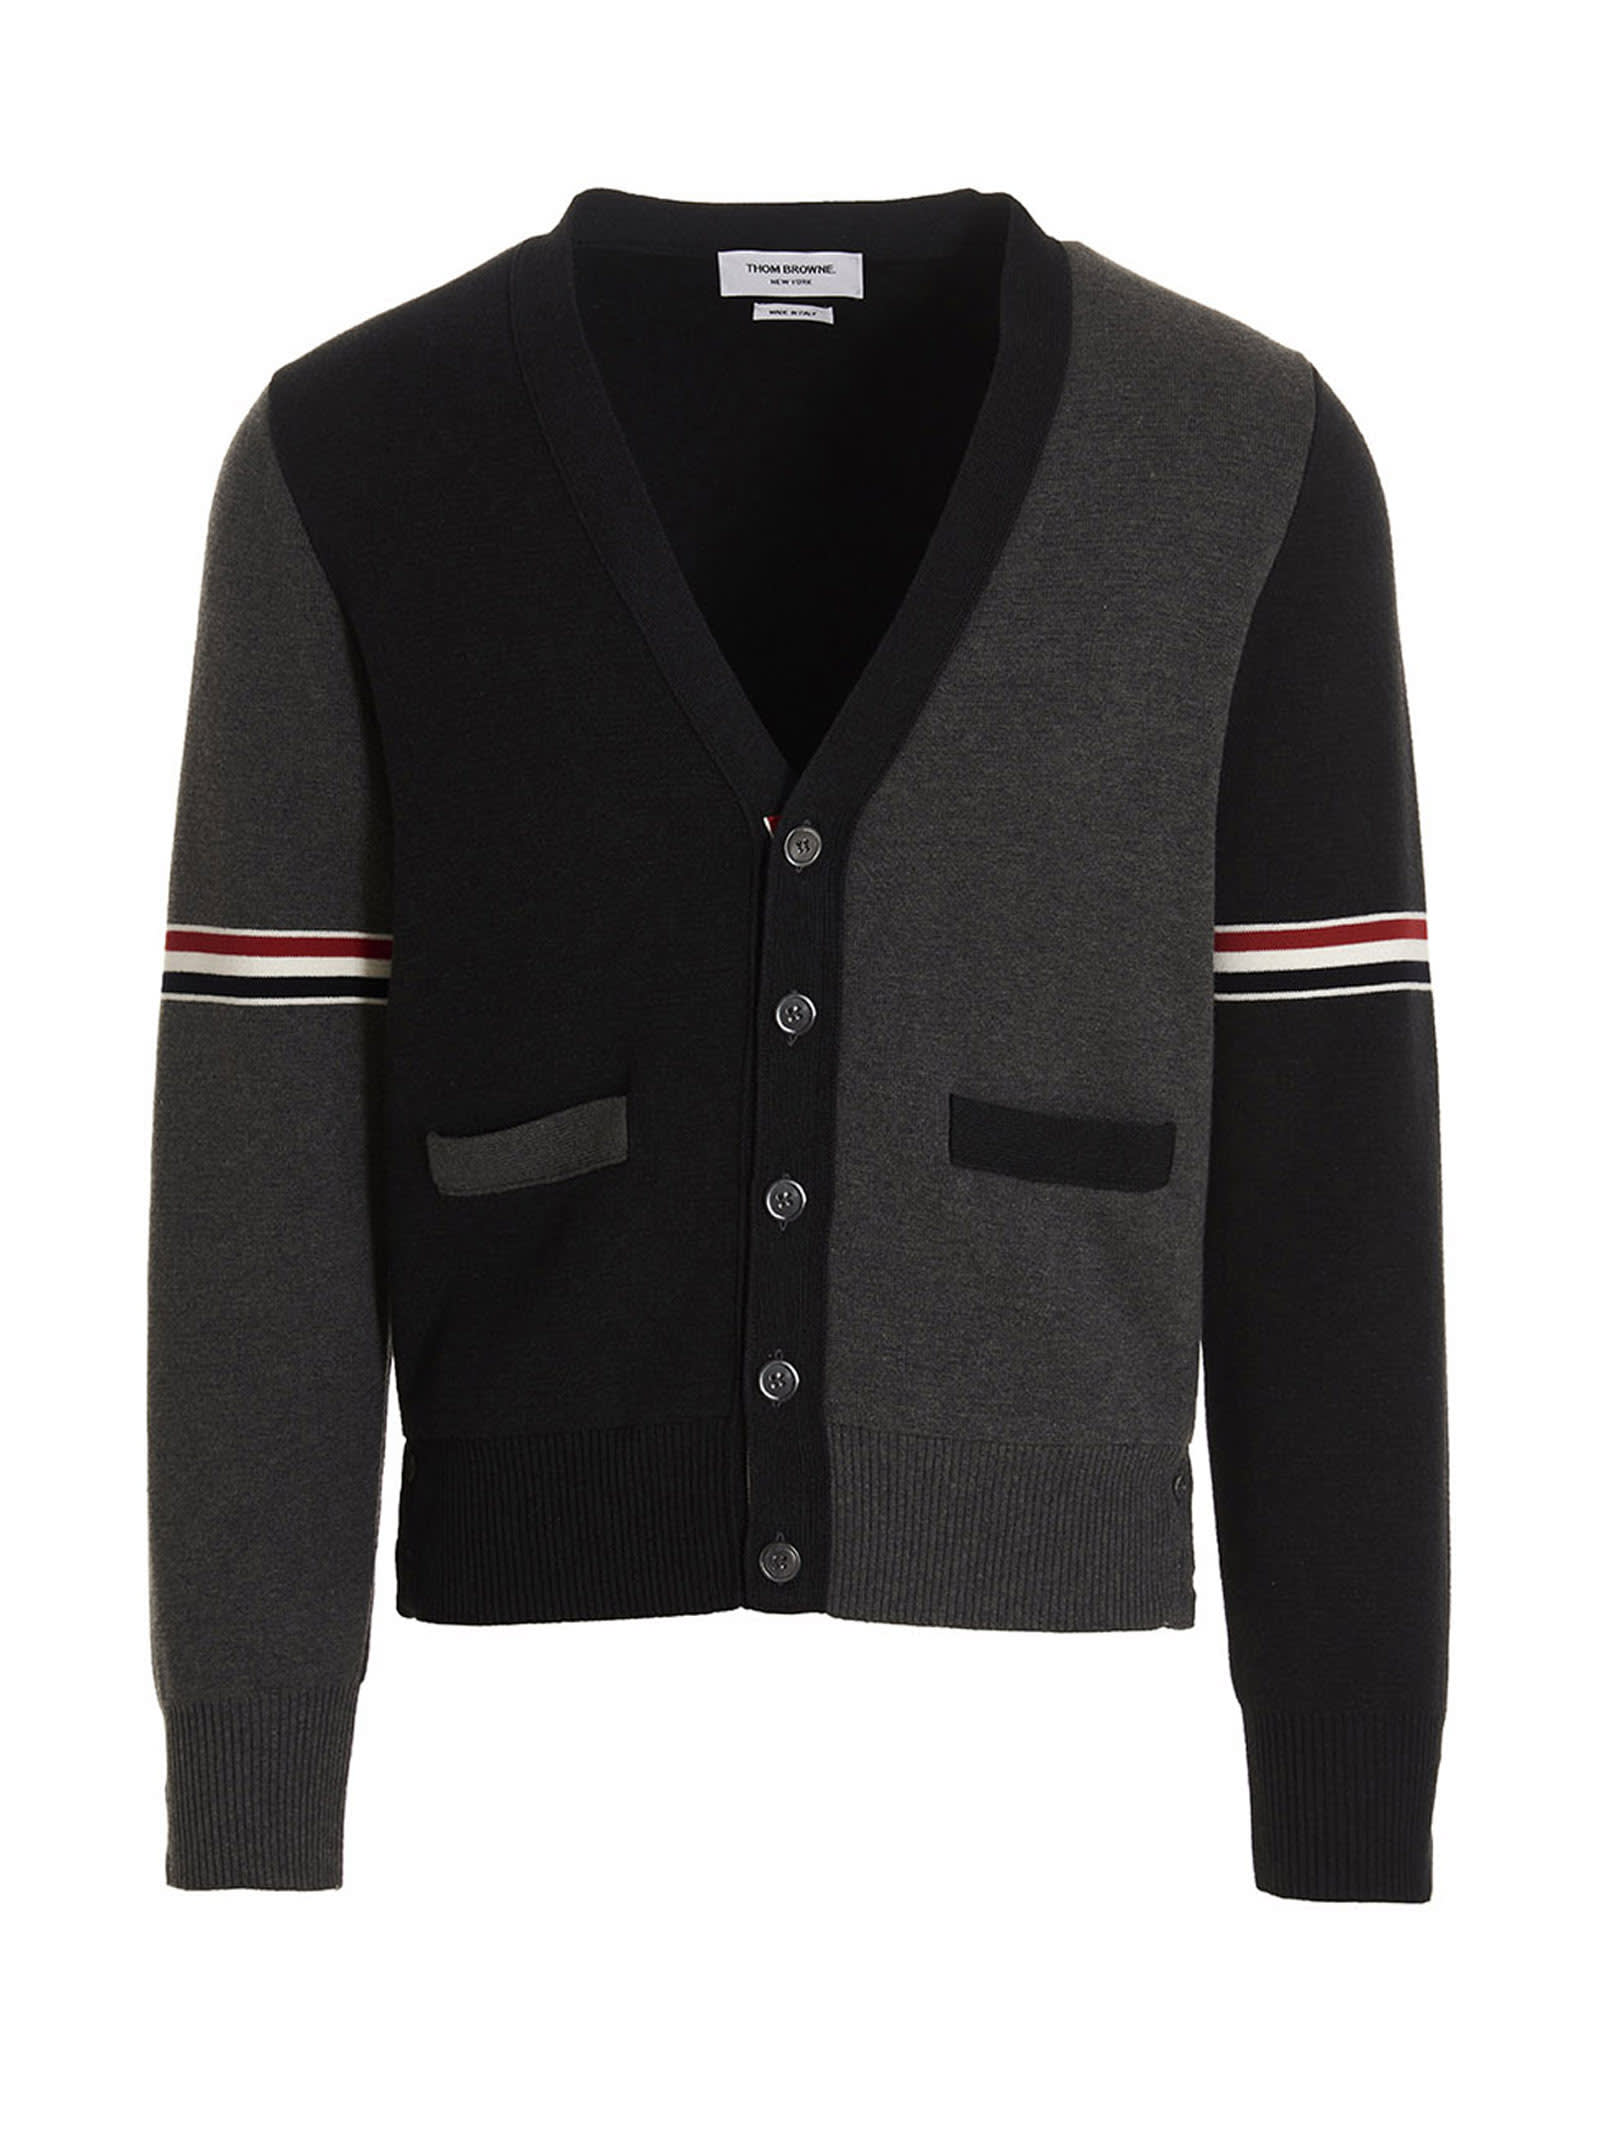 THOM BROWNE TWO-COLOR CARDIGAN